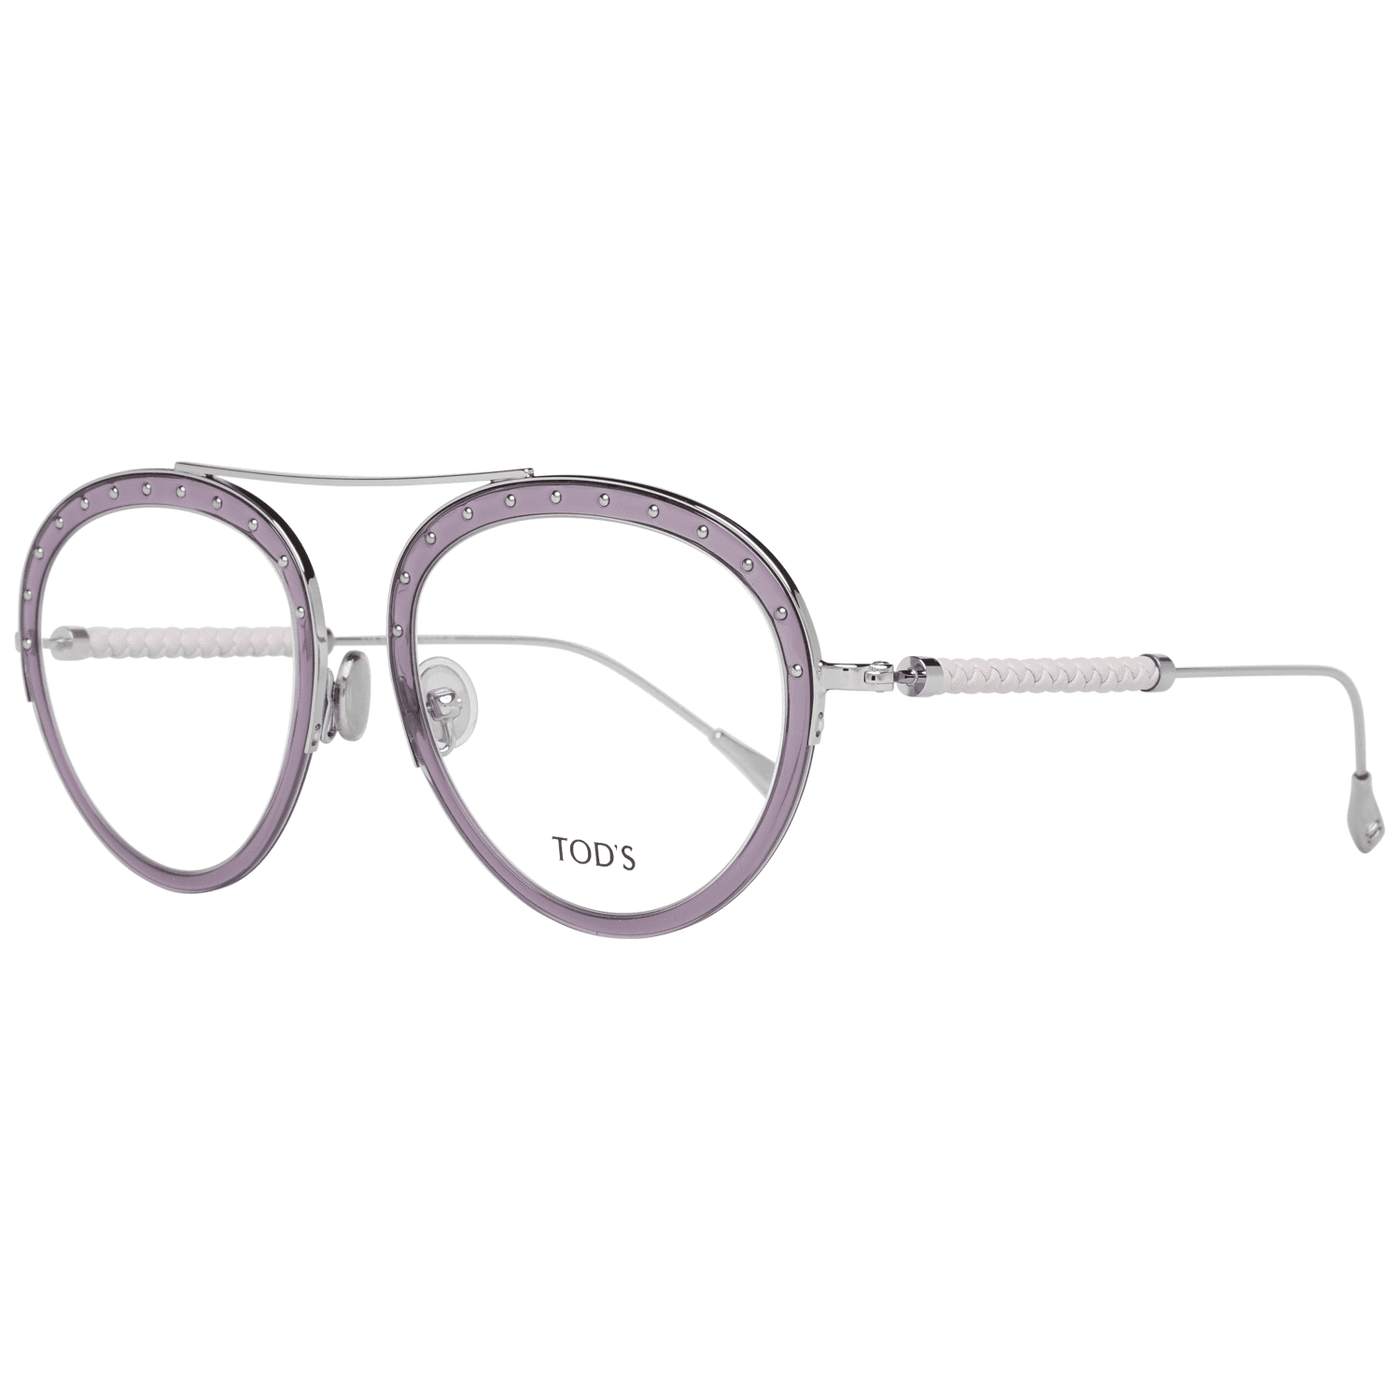 Tod's Purple Women Optical Frames #women, feed-agegroup-adult, feed-color-purple, feed-gender-female, Frames for Women - Frames, Purple, Tod's at SEYMAYKA